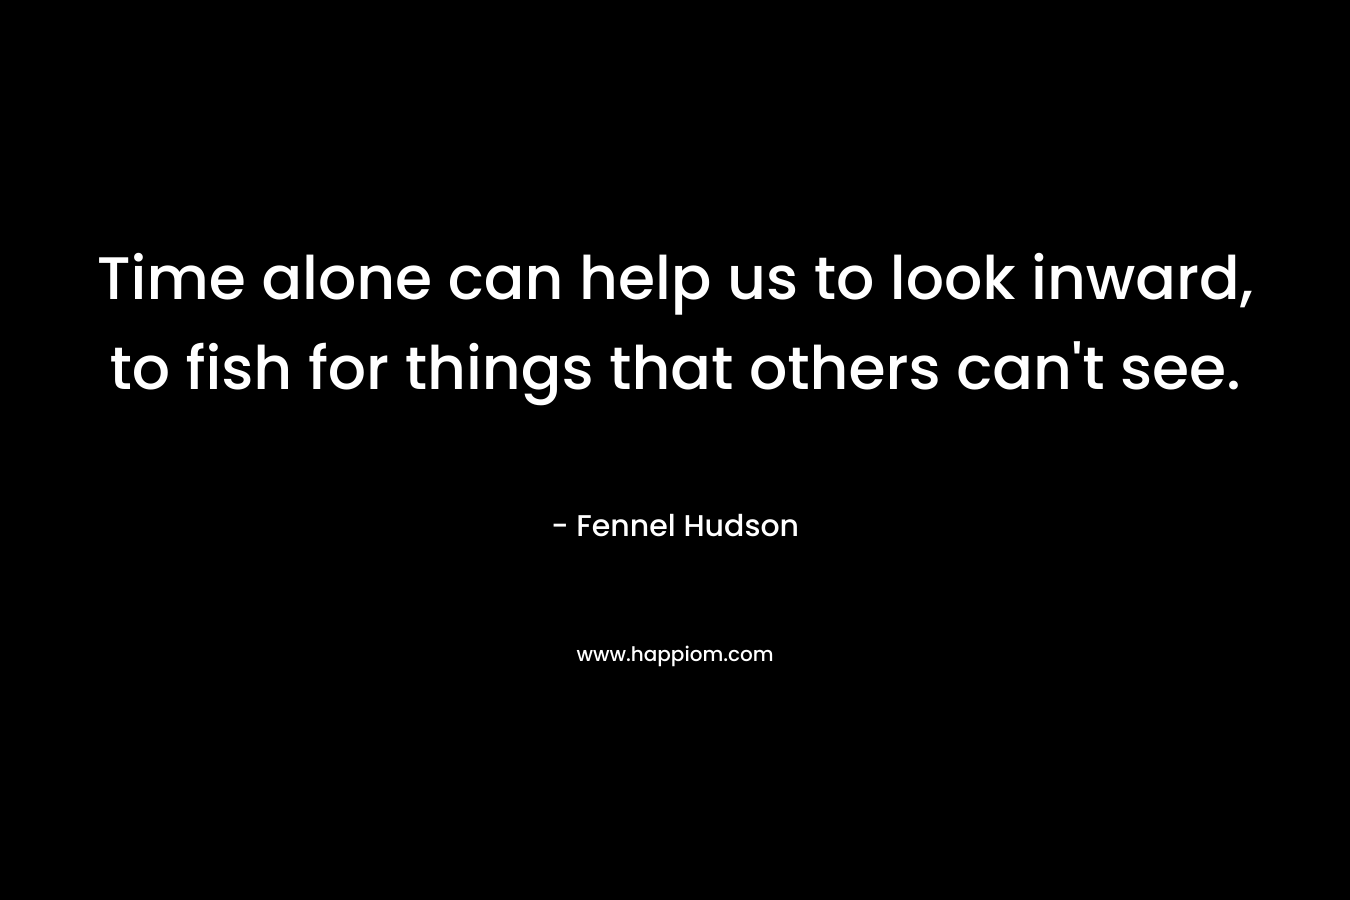 Time alone can help us to look inward, to fish for things that others can’t see. – Fennel Hudson